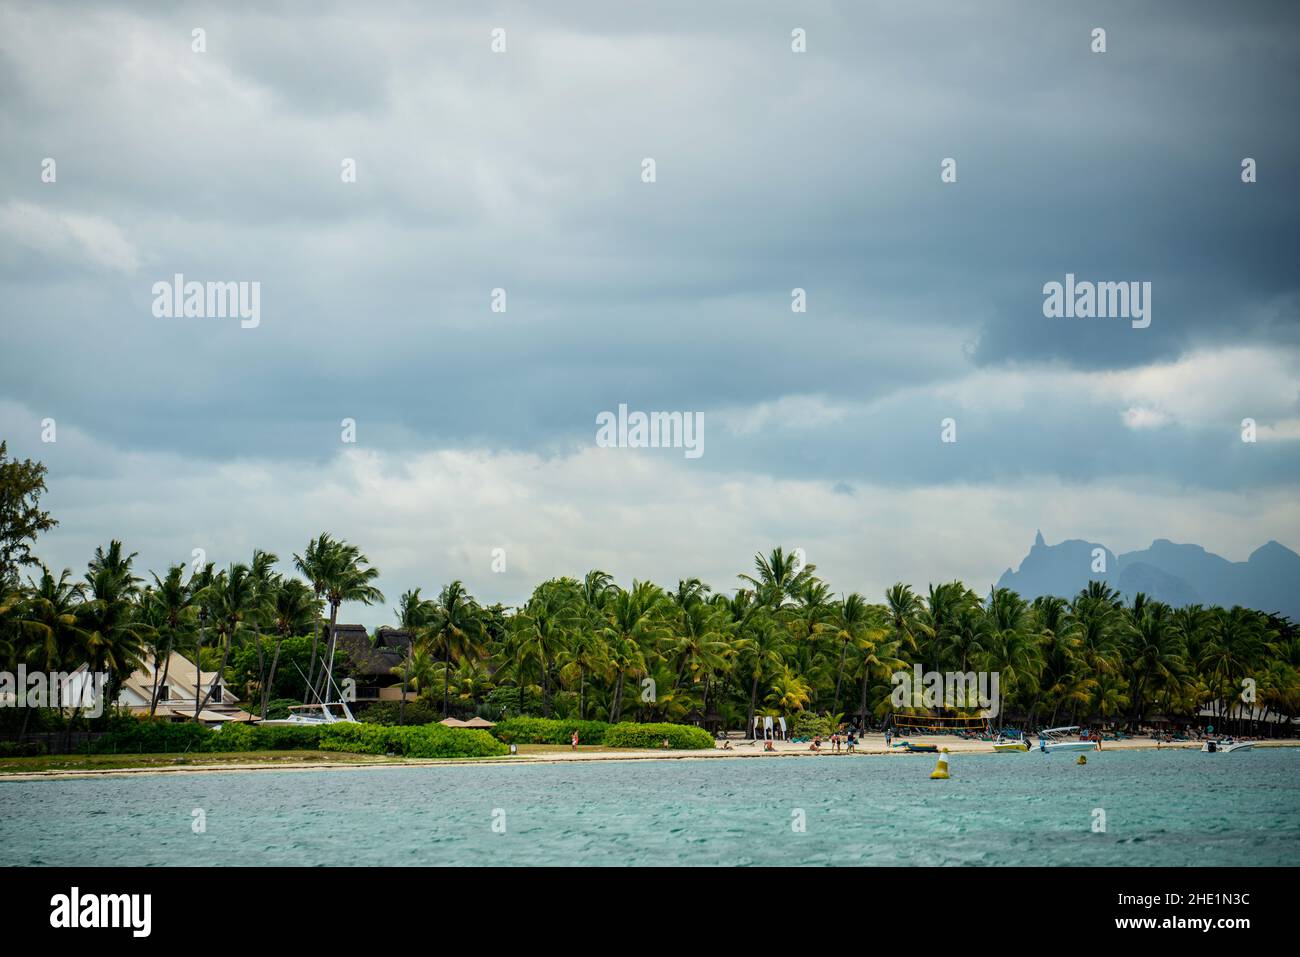 Mauritius in the Indian Ocean Stock Photo